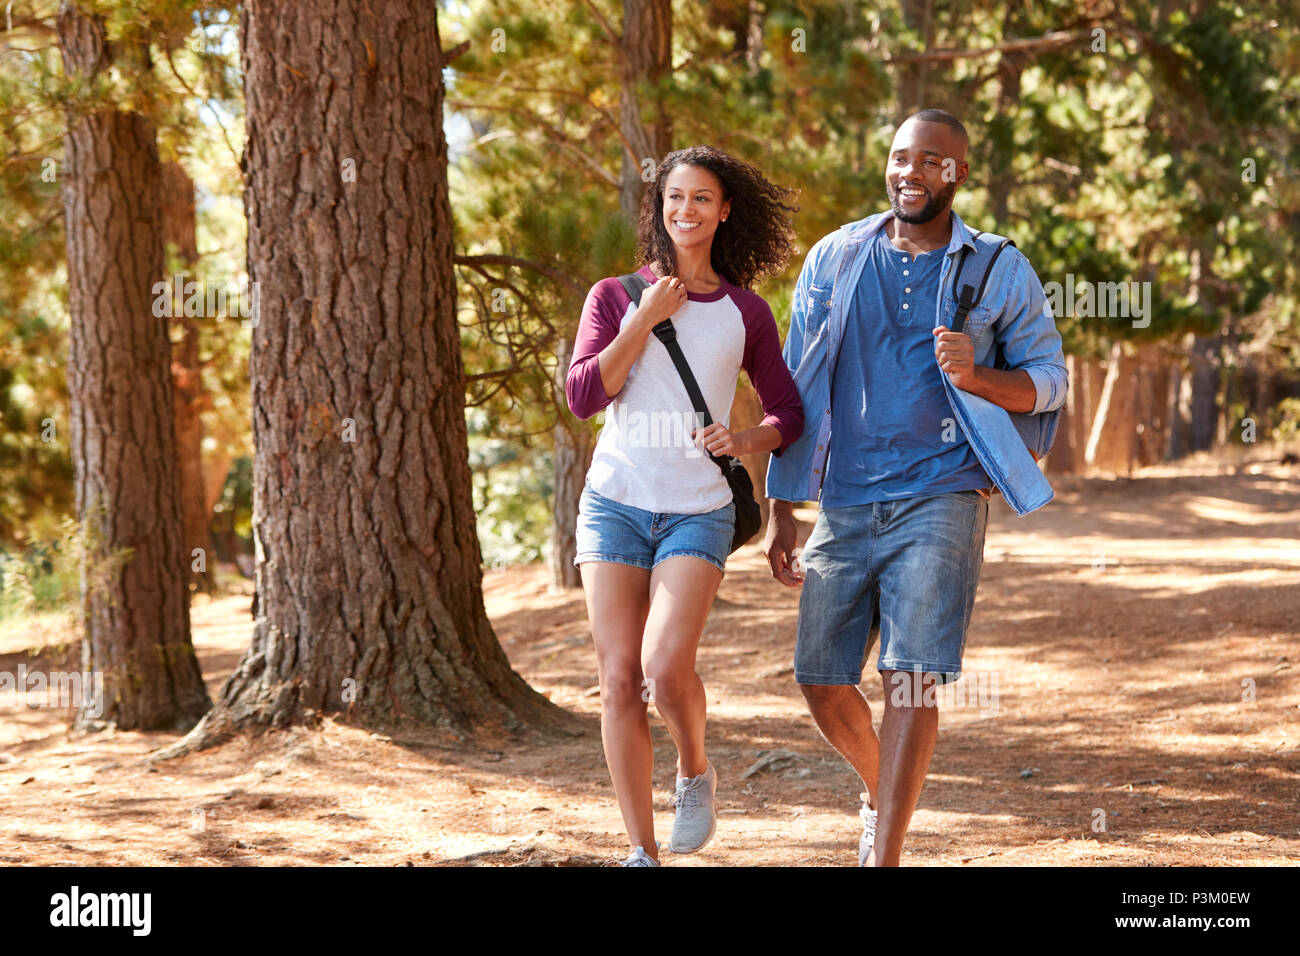 Couple On Hiking Adventure In Wooded Countryside Stock Photo